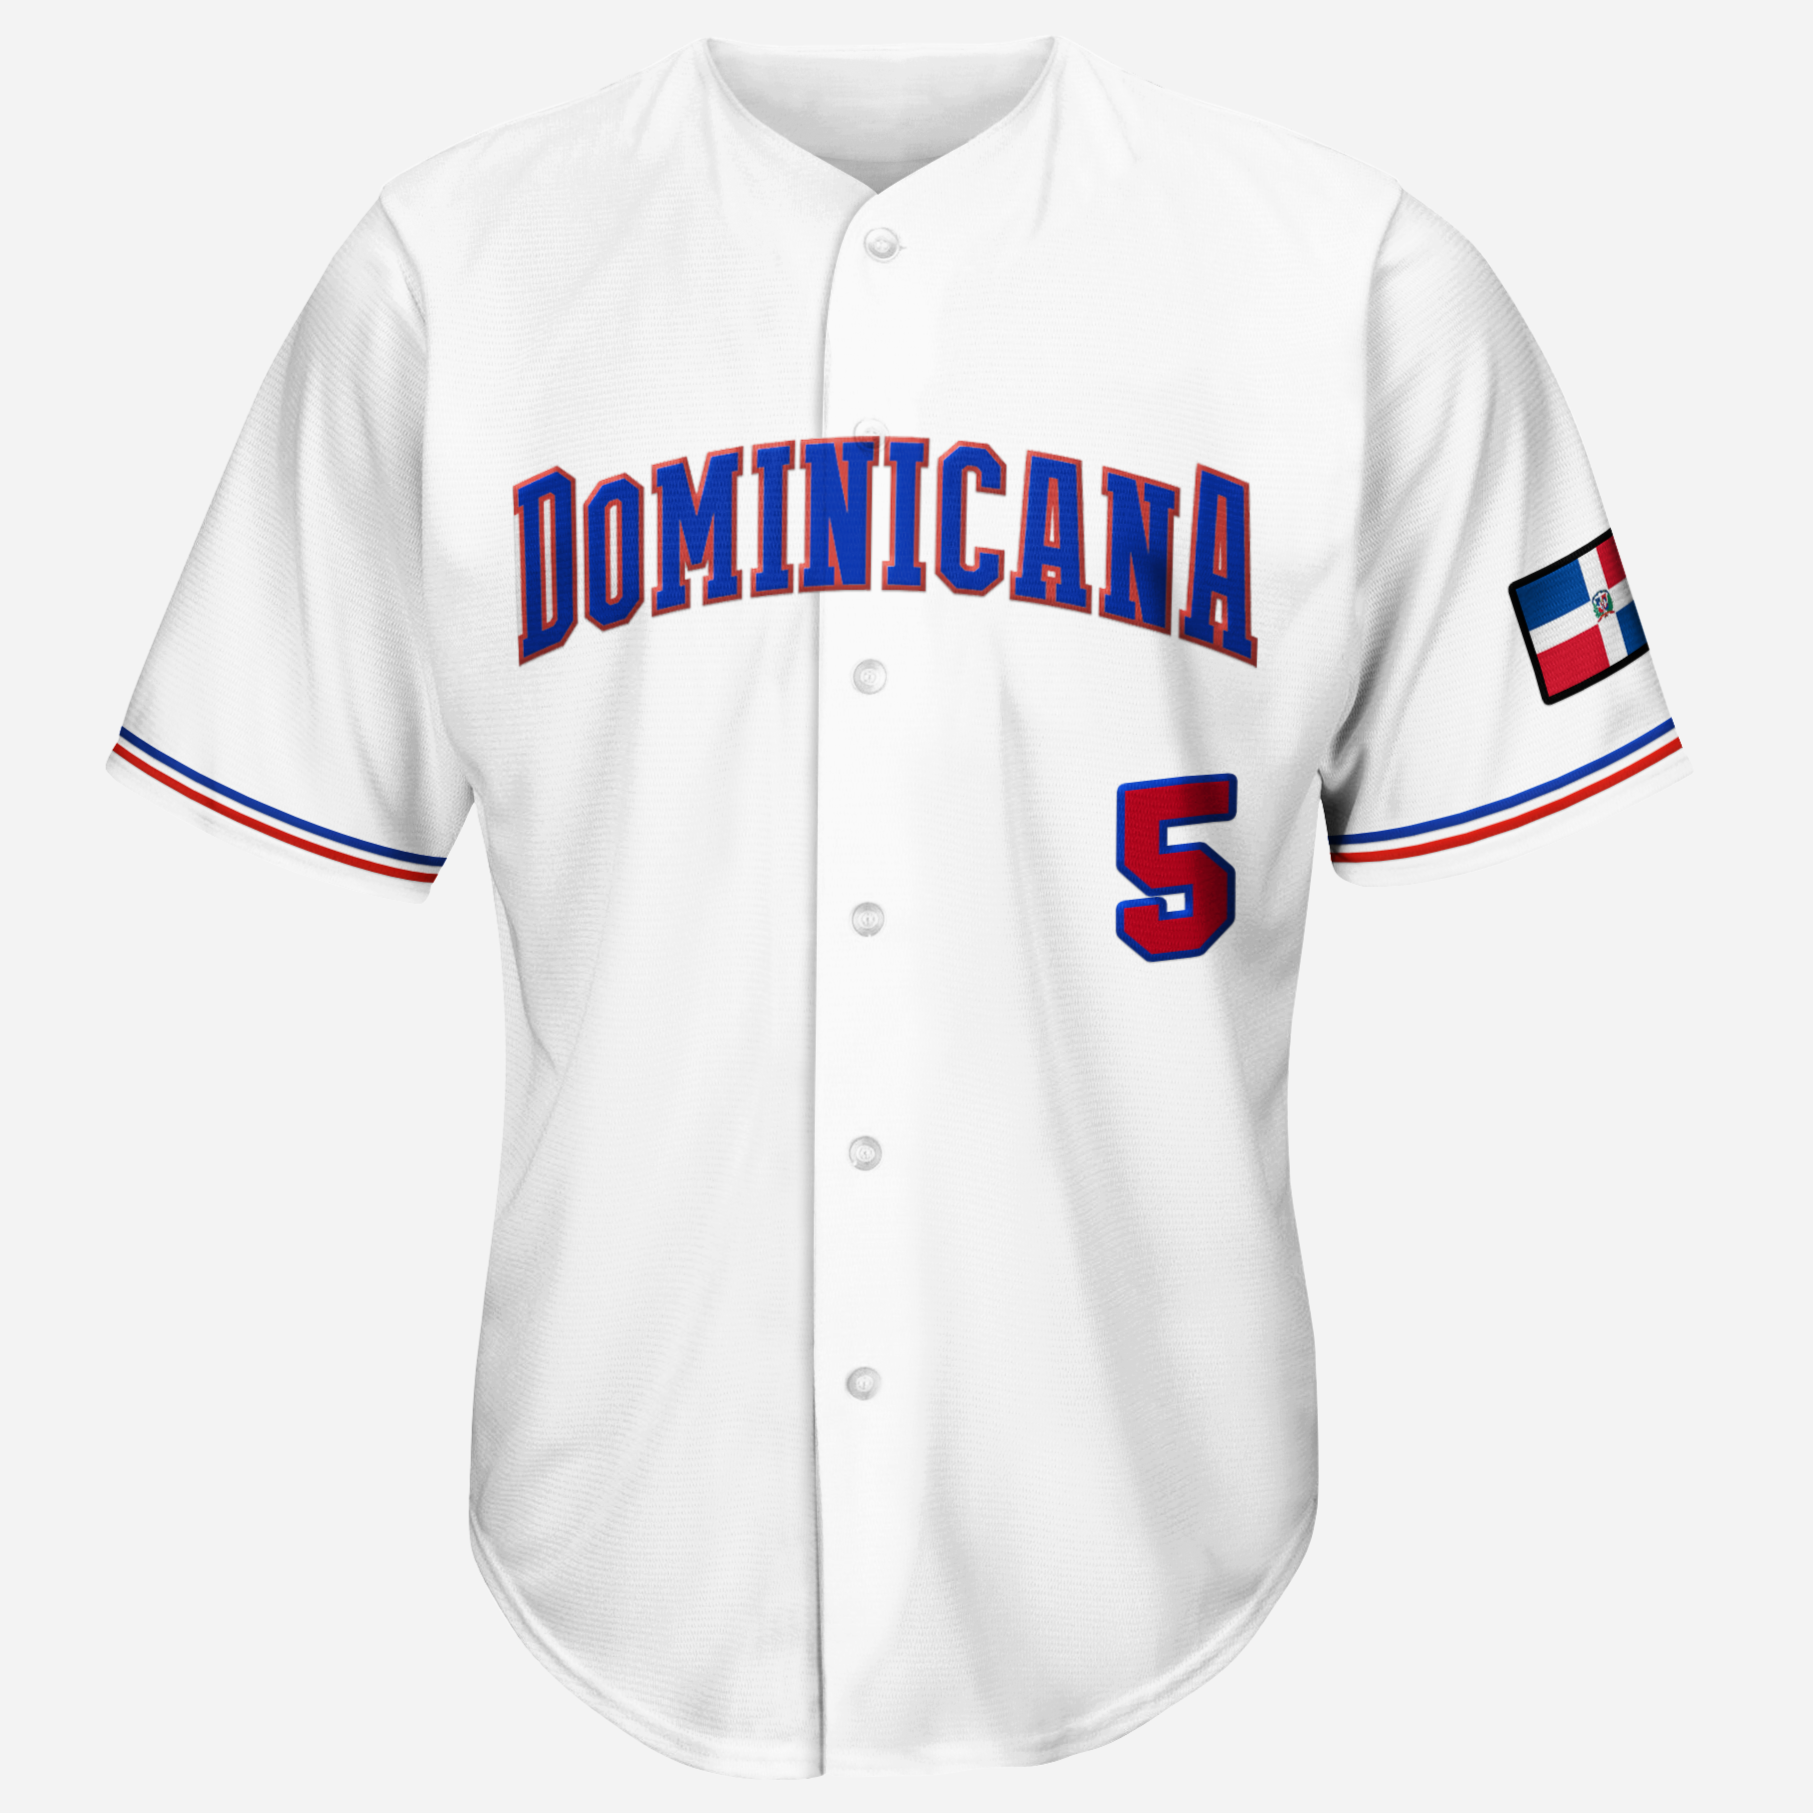 Personalized Dominican Republic Baseball Jersey Shirt,Team Name